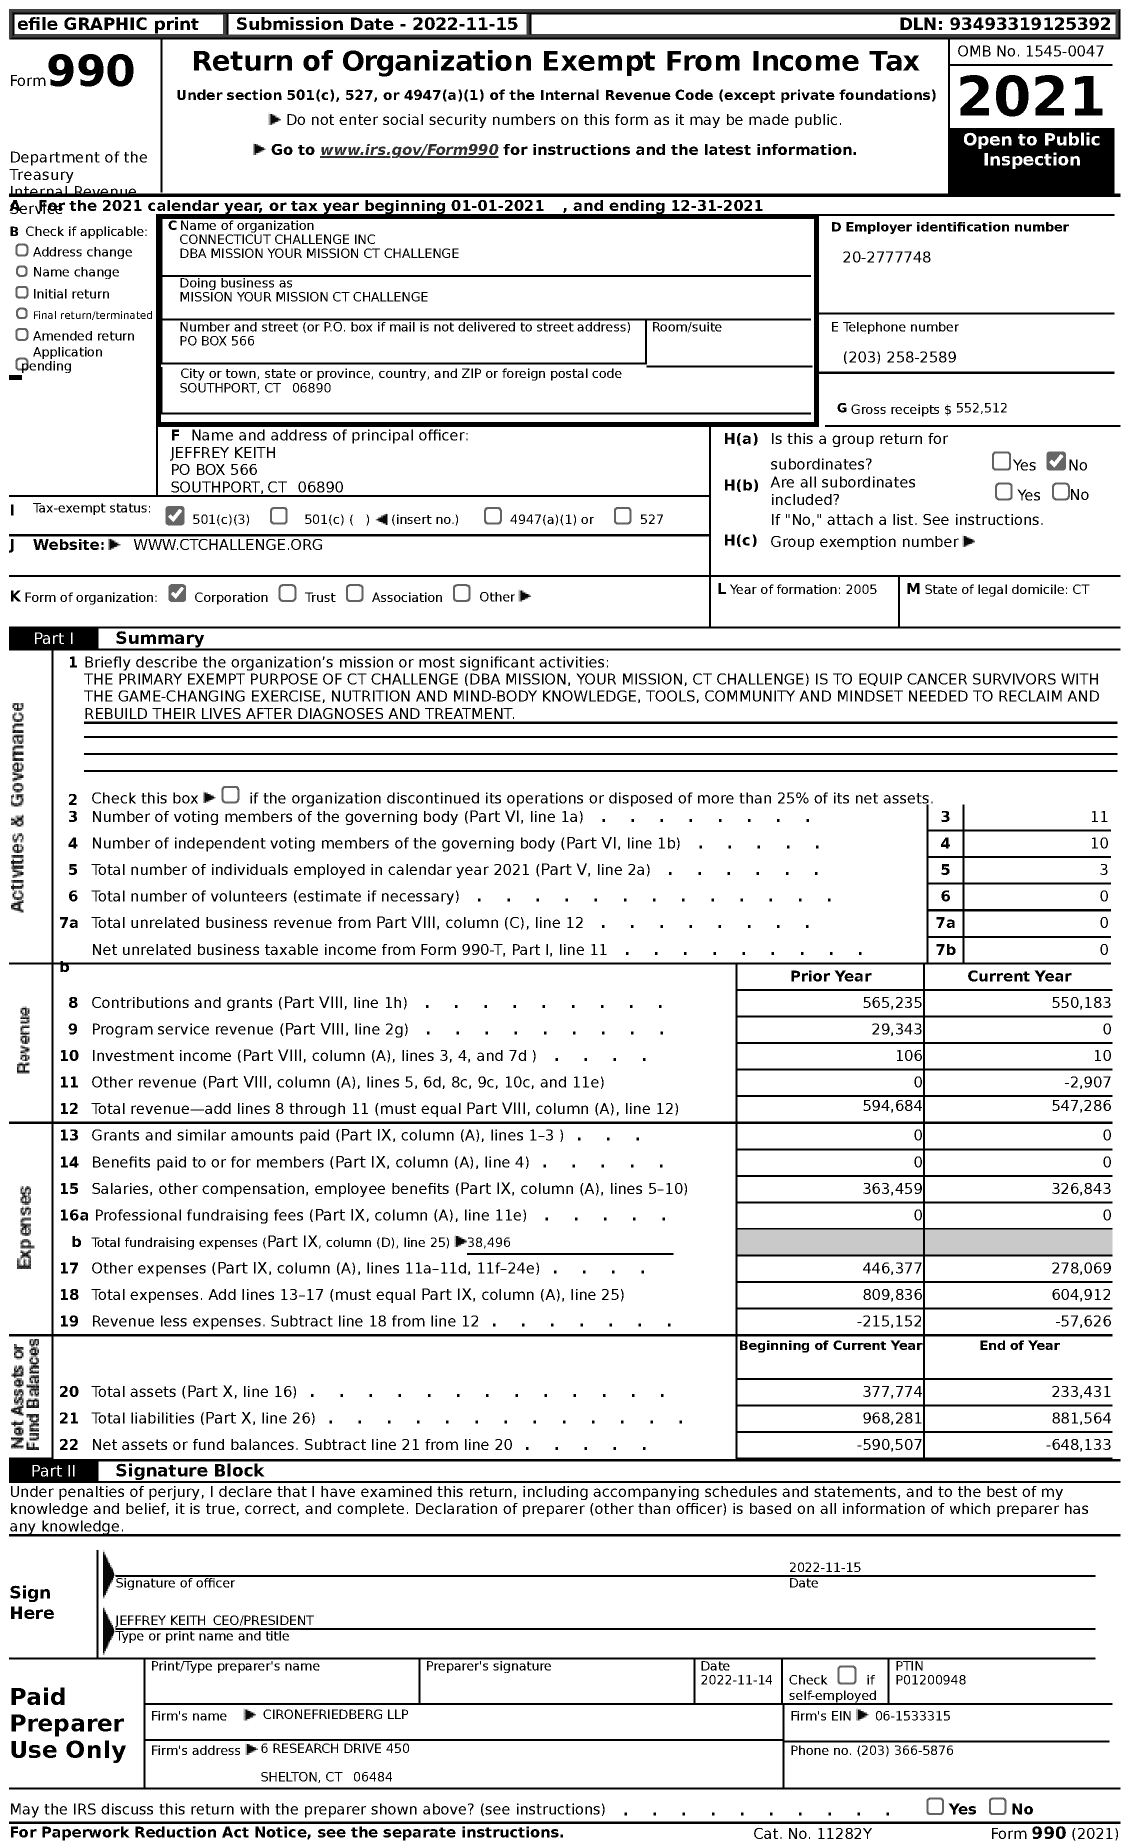 Image of first page of 2021 Form 990 for Mission Your Mission CT Challenge